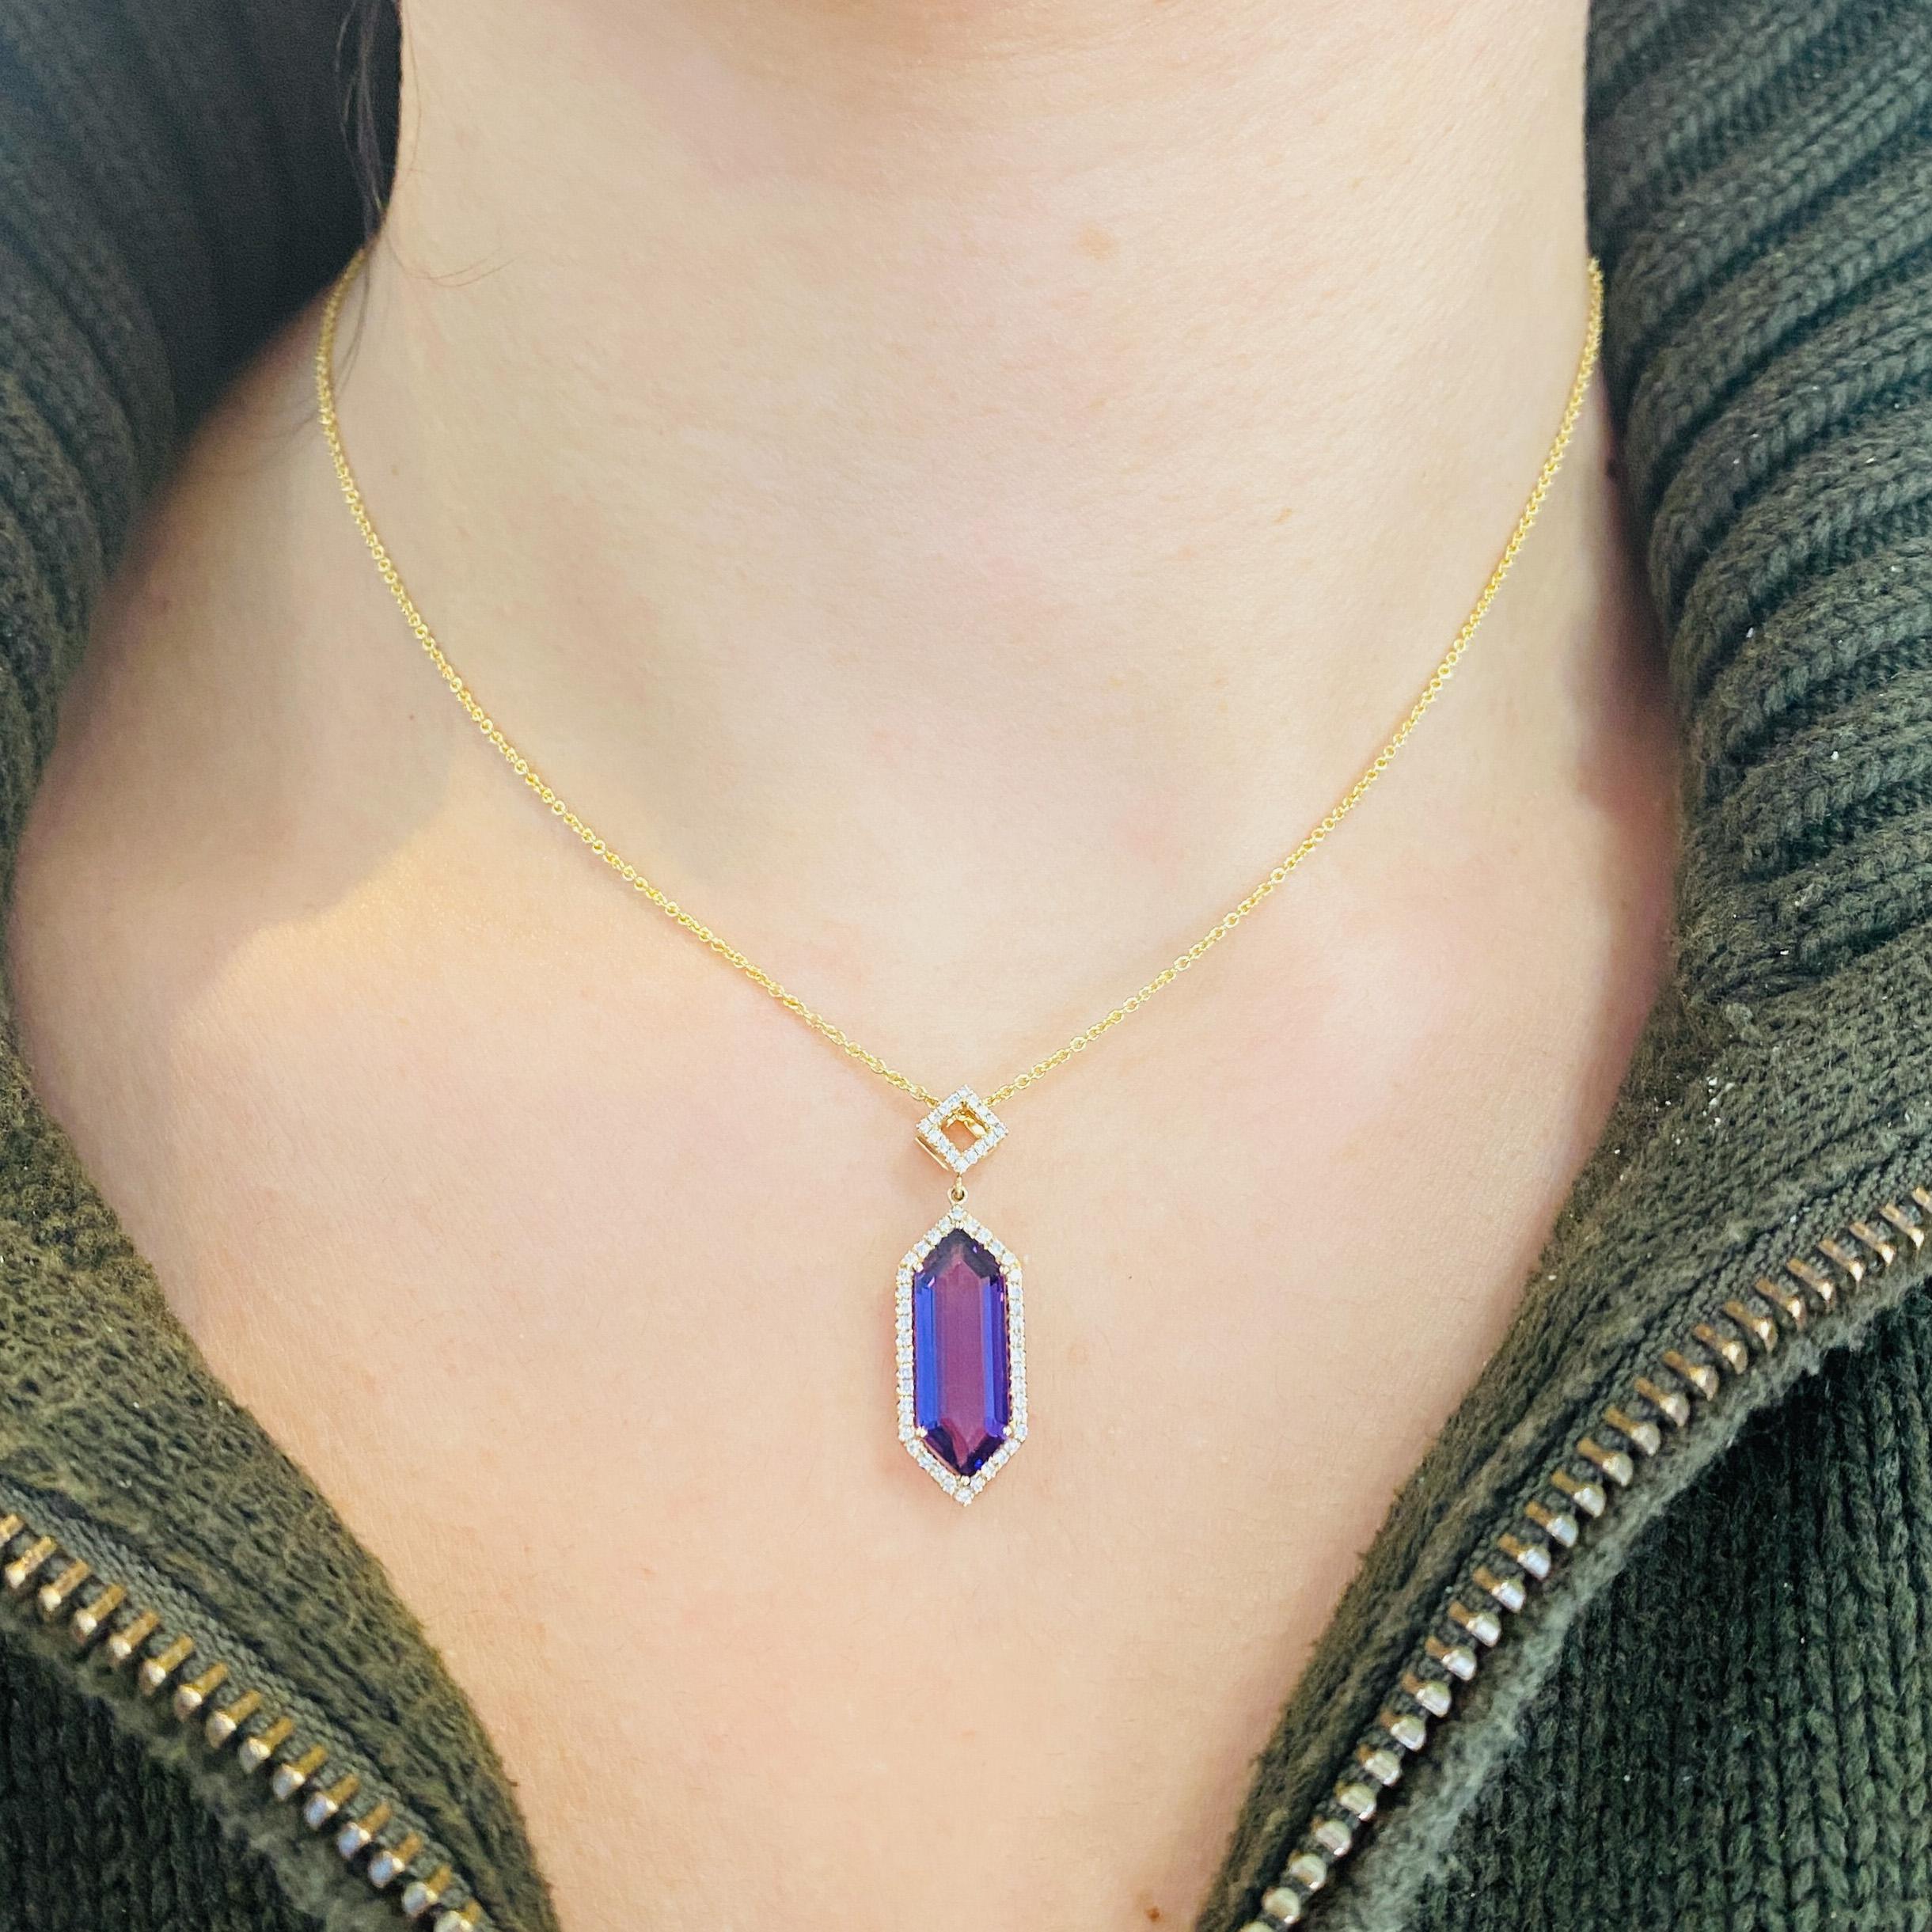 Hexagonal Amethyst Pendant with Diamond Halo 3.75 Carat and Chain in 14k Gold In New Condition For Sale In Austin, TX